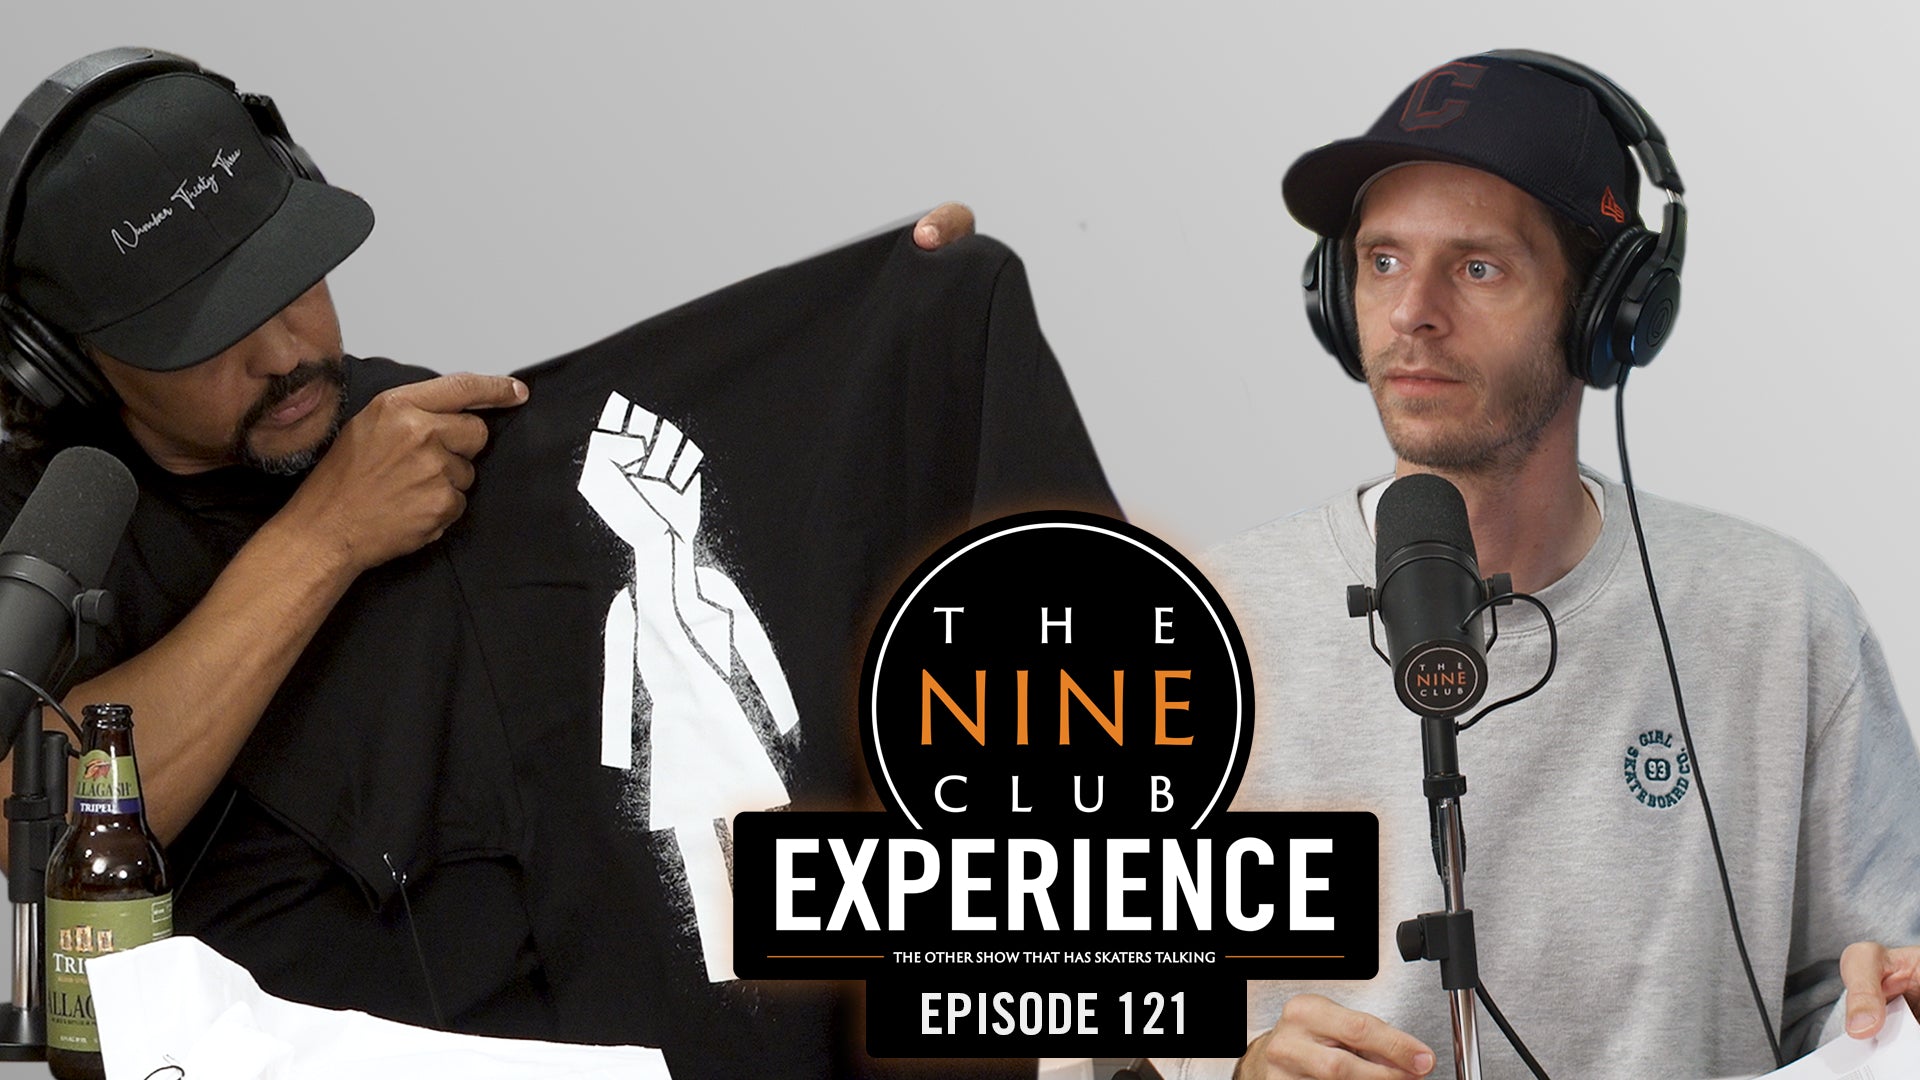 The Nine Club Experience episode 121